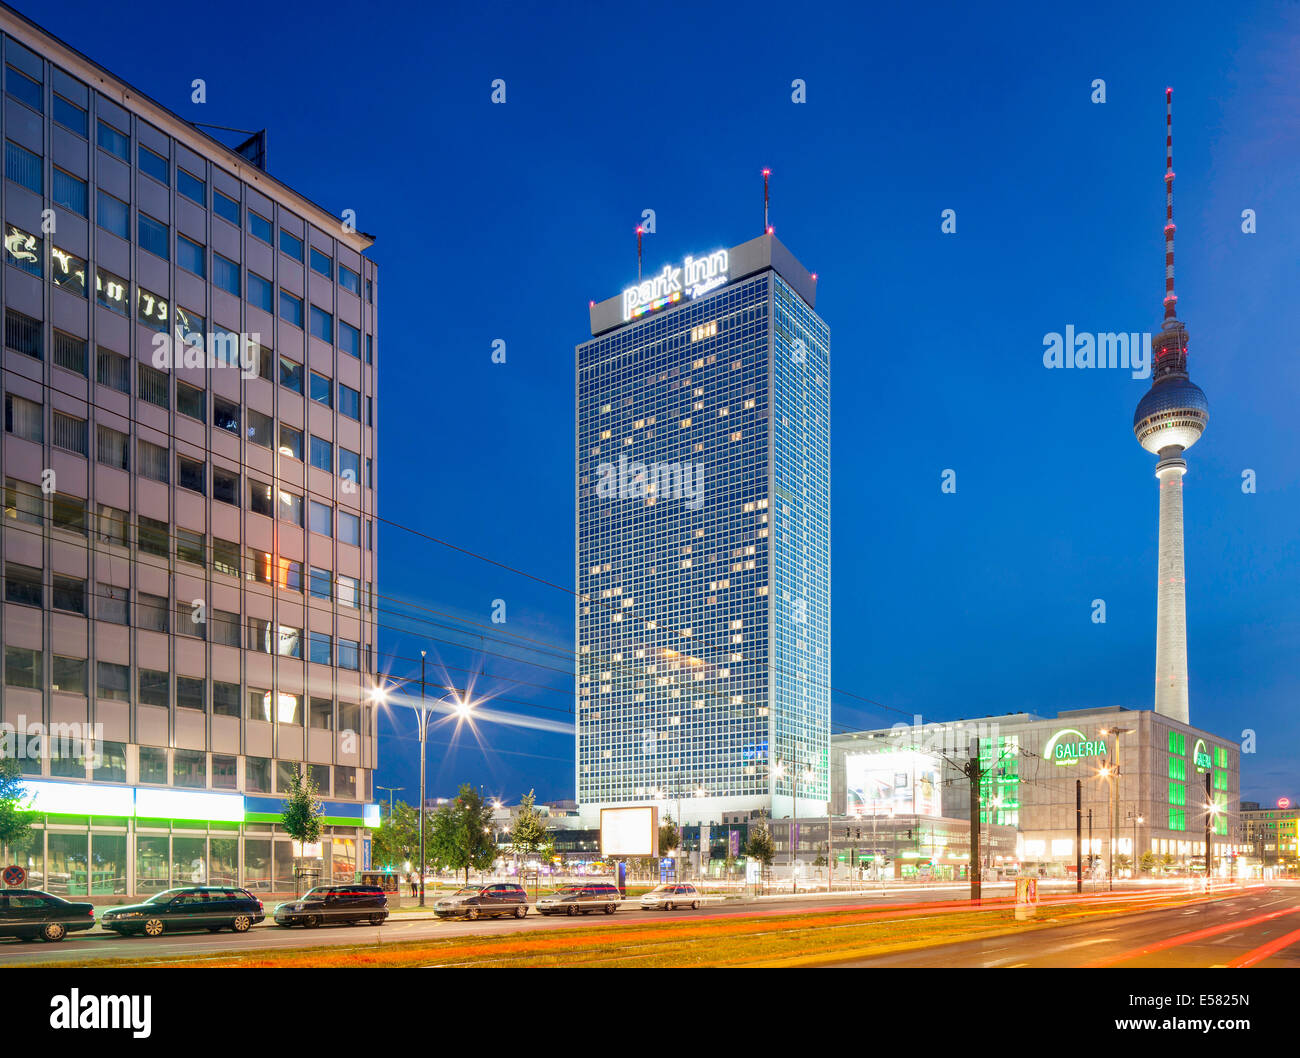 Former Inter Hotel, later Forum Hotel and Park Inn by Radisson, TV Tower, Alexanderplatz square, Mitte district, Berlin, Germany Stock Photo